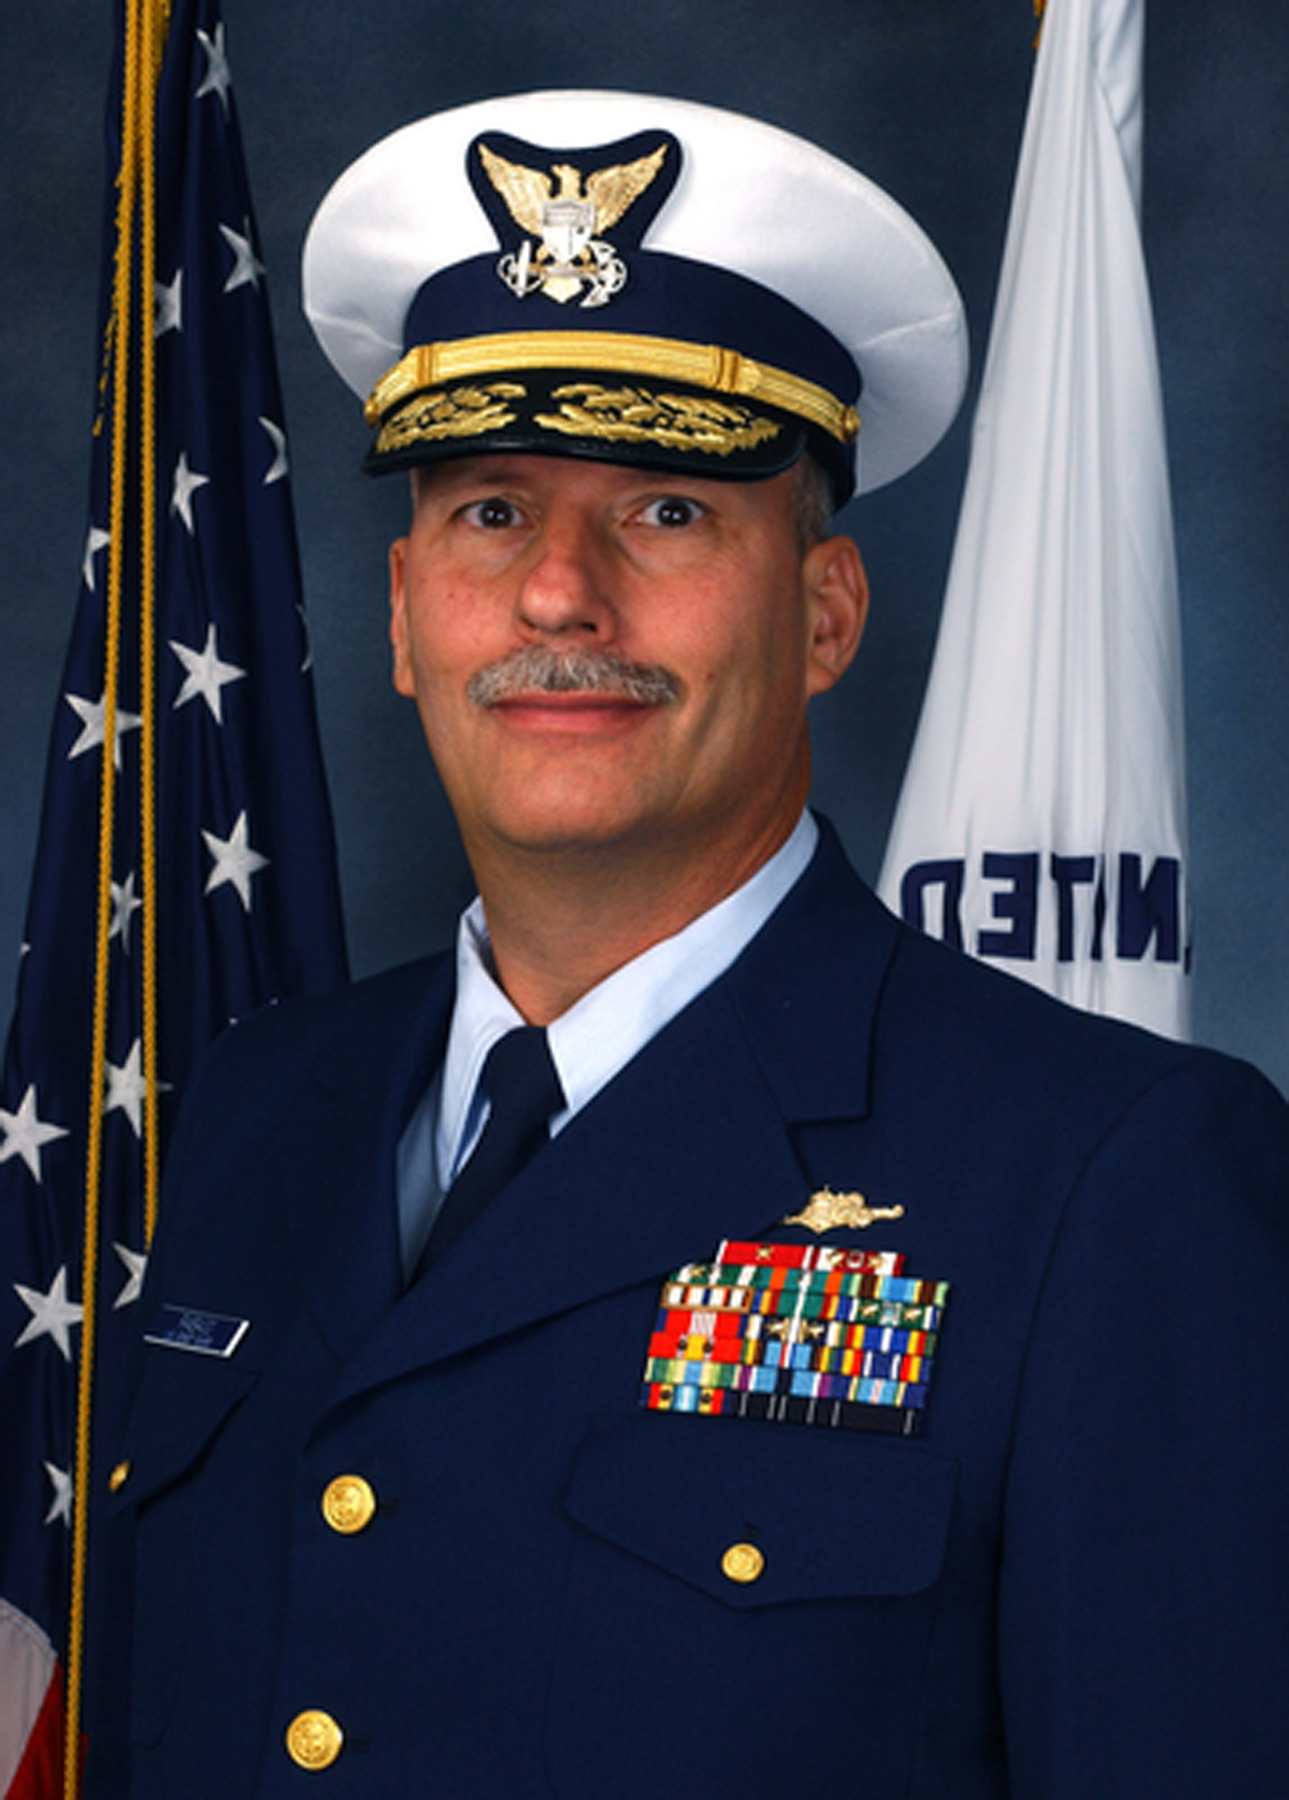 14.	In 2006, Rear Admiral Ronald Rábago became the first Hispanic-American flag officer in the Coast Guard. He graduated from the Coast Guard Academy in 1978. (U.S. Coast Guard)